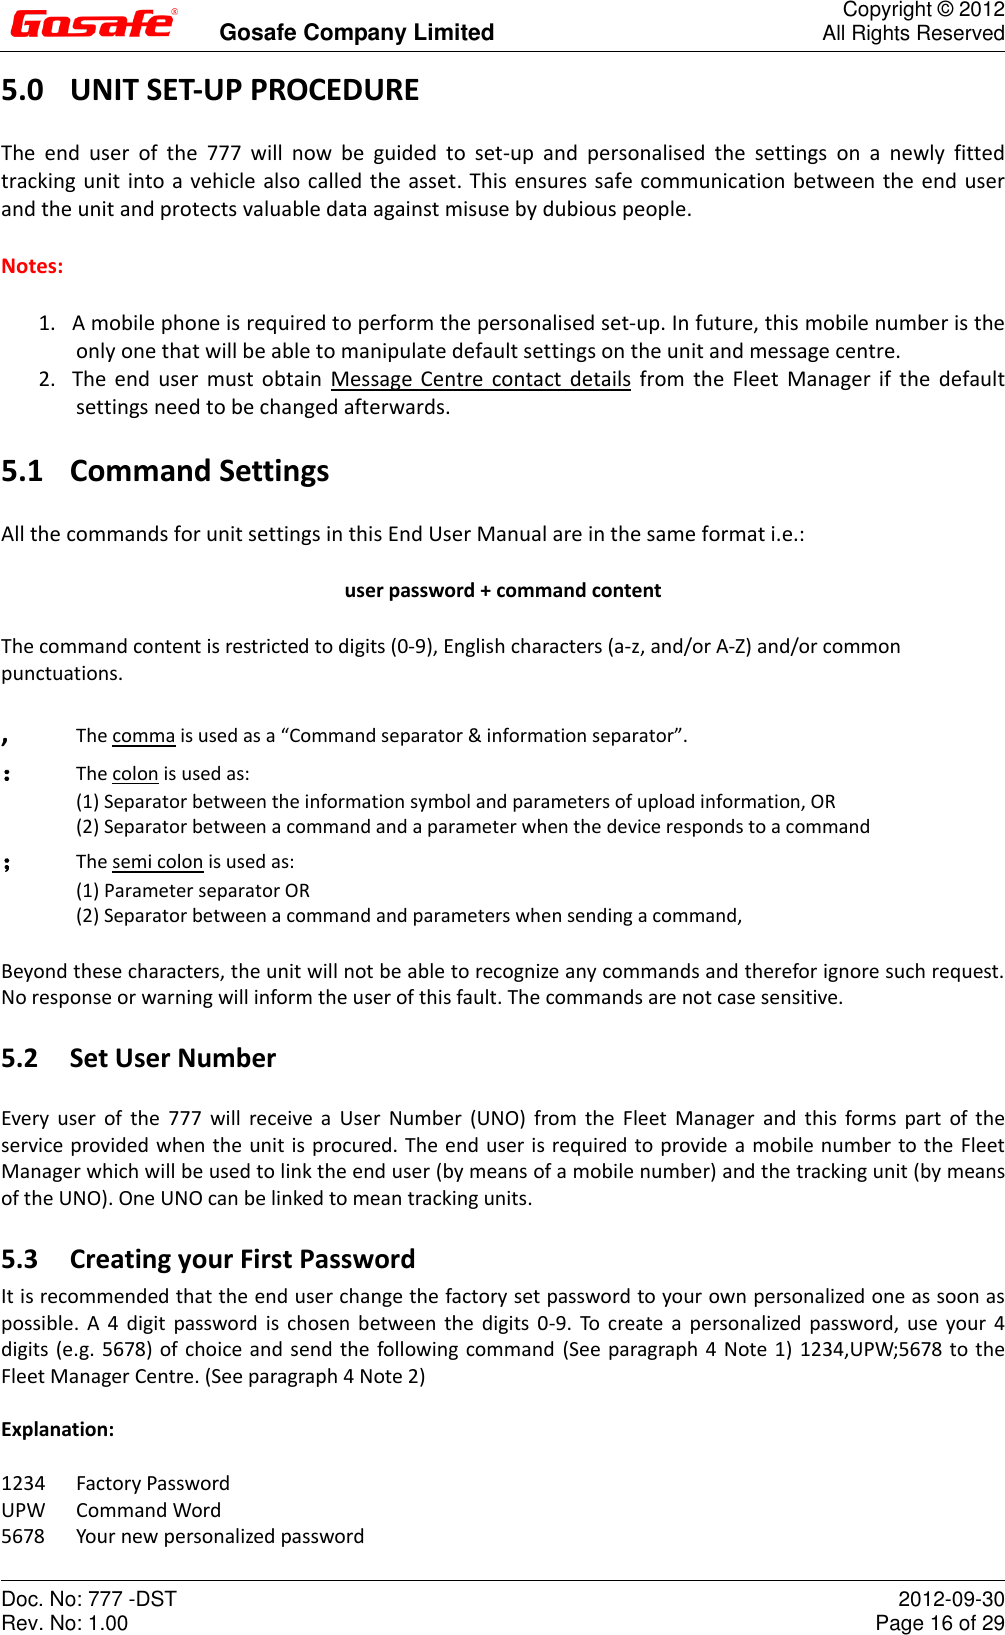         Gosafe Company Limited  Copyright © 2012 All Rights Reserved Doc. No: 777 -DST Rev. No: 1.00  2012-09-30 Page 16 of 29 5.0 UNIT SET-UP PROCEDURE The  end  user  of  the  777  will  now  be  guided  to  set-up  and  personalised  the  settings  on  a  newly  fitted tracking unit into a vehicle also called the asset. This ensures safe communication between the end user and the unit and protects valuable data against misuse by dubious people. Notes:  1. A mobile phone is required to perform the personalised set-up. In future, this mobile number is the only one that will be able to manipulate default settings on the unit and message centre. 2. The end user must obtain  Message  Centre  contact  details from  the Fleet Manager if the default settings need to be changed afterwards. 5.1 Command Settings All the commands for unit settings in this End User Manual are in the same format i.e.: user password + command content The command content is restricted to digits (0-9), English characters (a-z, and/or A-Z) and/or common punctuations. ,  The comma is used as a “Command separator &amp; information separator”. ：  The colon is used as: (1) Separator between the information symbol and parameters of upload information, OR (2) Separator between a command and a parameter when the device responds to a command ；  The semi colon is used as: (1) Parameter separator OR (2) Separator between a command and parameters when sending a command, Beyond these characters, the unit will not be able to recognize any commands and therefor ignore such request. No response or warning will inform the user of this fault. The commands are not case sensitive. 5.2 Set User Number Every  user  of the  777  will  receive  a  User  Number  (UNO)  from the  Fleet  Manager  and  this  forms  part  of  the service provided when the unit is procured. The end user is required to provide a mobile number to the Fleet Manager which will be used to link the end user (by means of a mobile number) and the tracking unit (by means of the UNO). One UNO can be linked to mean tracking units. 5.3 Creating your First Password It is recommended that the end user change the factory set password to your own personalized one as soon as possible.  A 4  digit  password is  chosen between  the digits  0-9.  To  create a  personalized password,  use your  4 digits (e.g. 5678) of choice and send the following command (See paragraph 4 Note 1) 1234,UPW;5678 to the Fleet Manager Centre. (See paragraph 4 Note 2)  Explanation:   1234  Factory Password UPW  Command Word 5678  Your new personalized password 